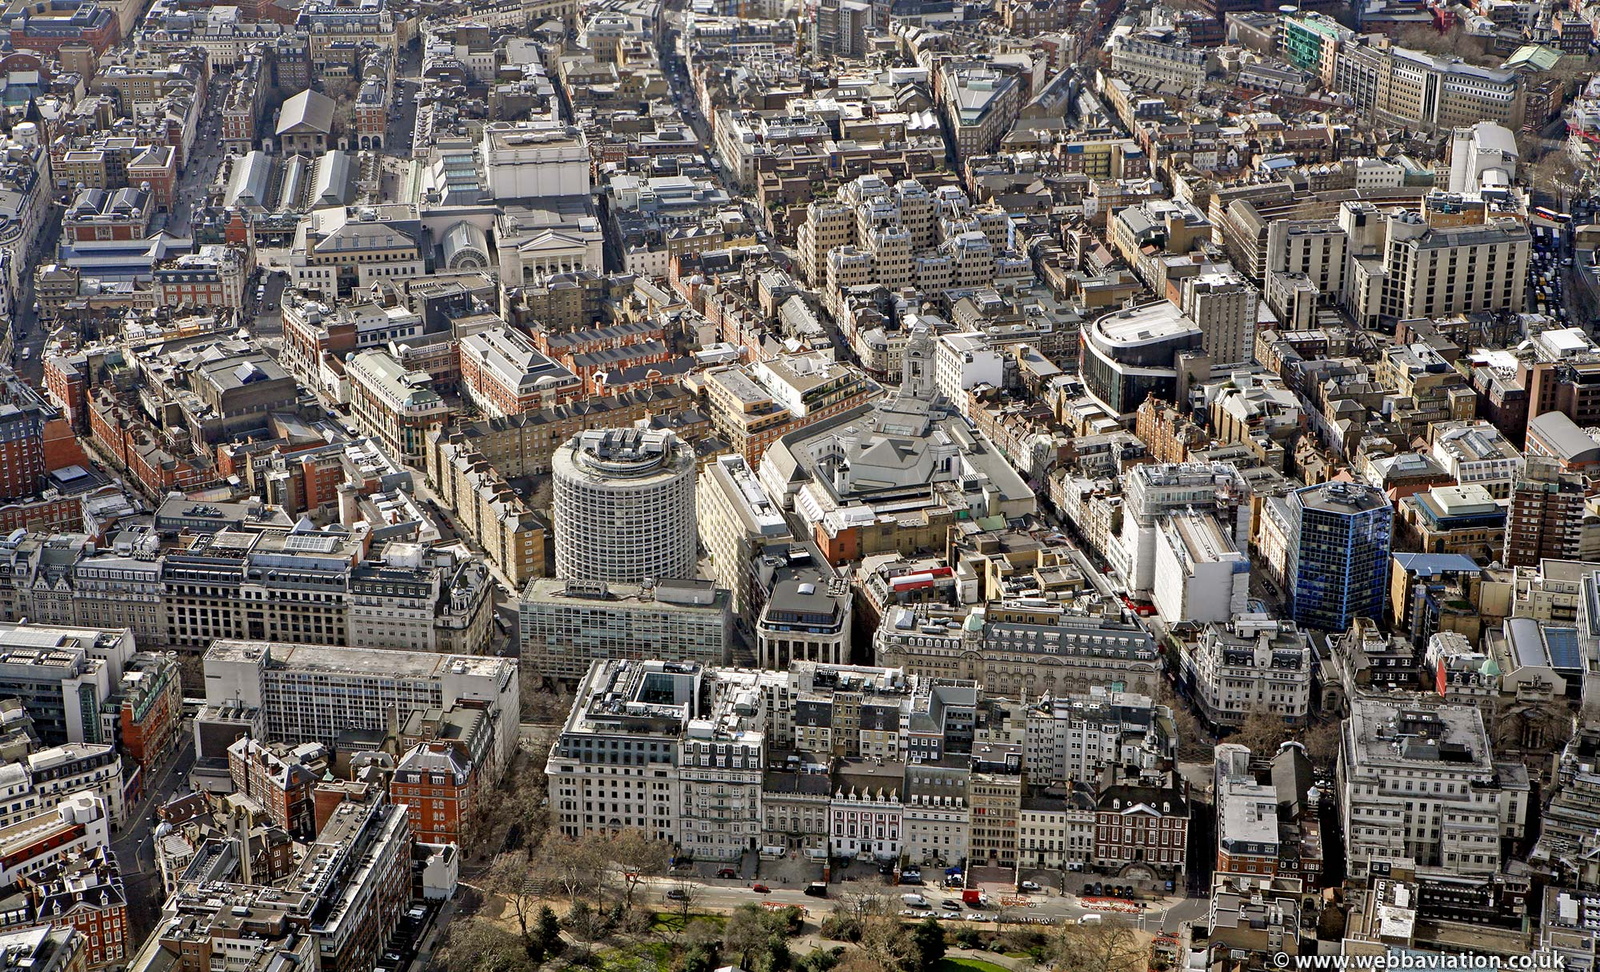  Kingsway Camden  from the air